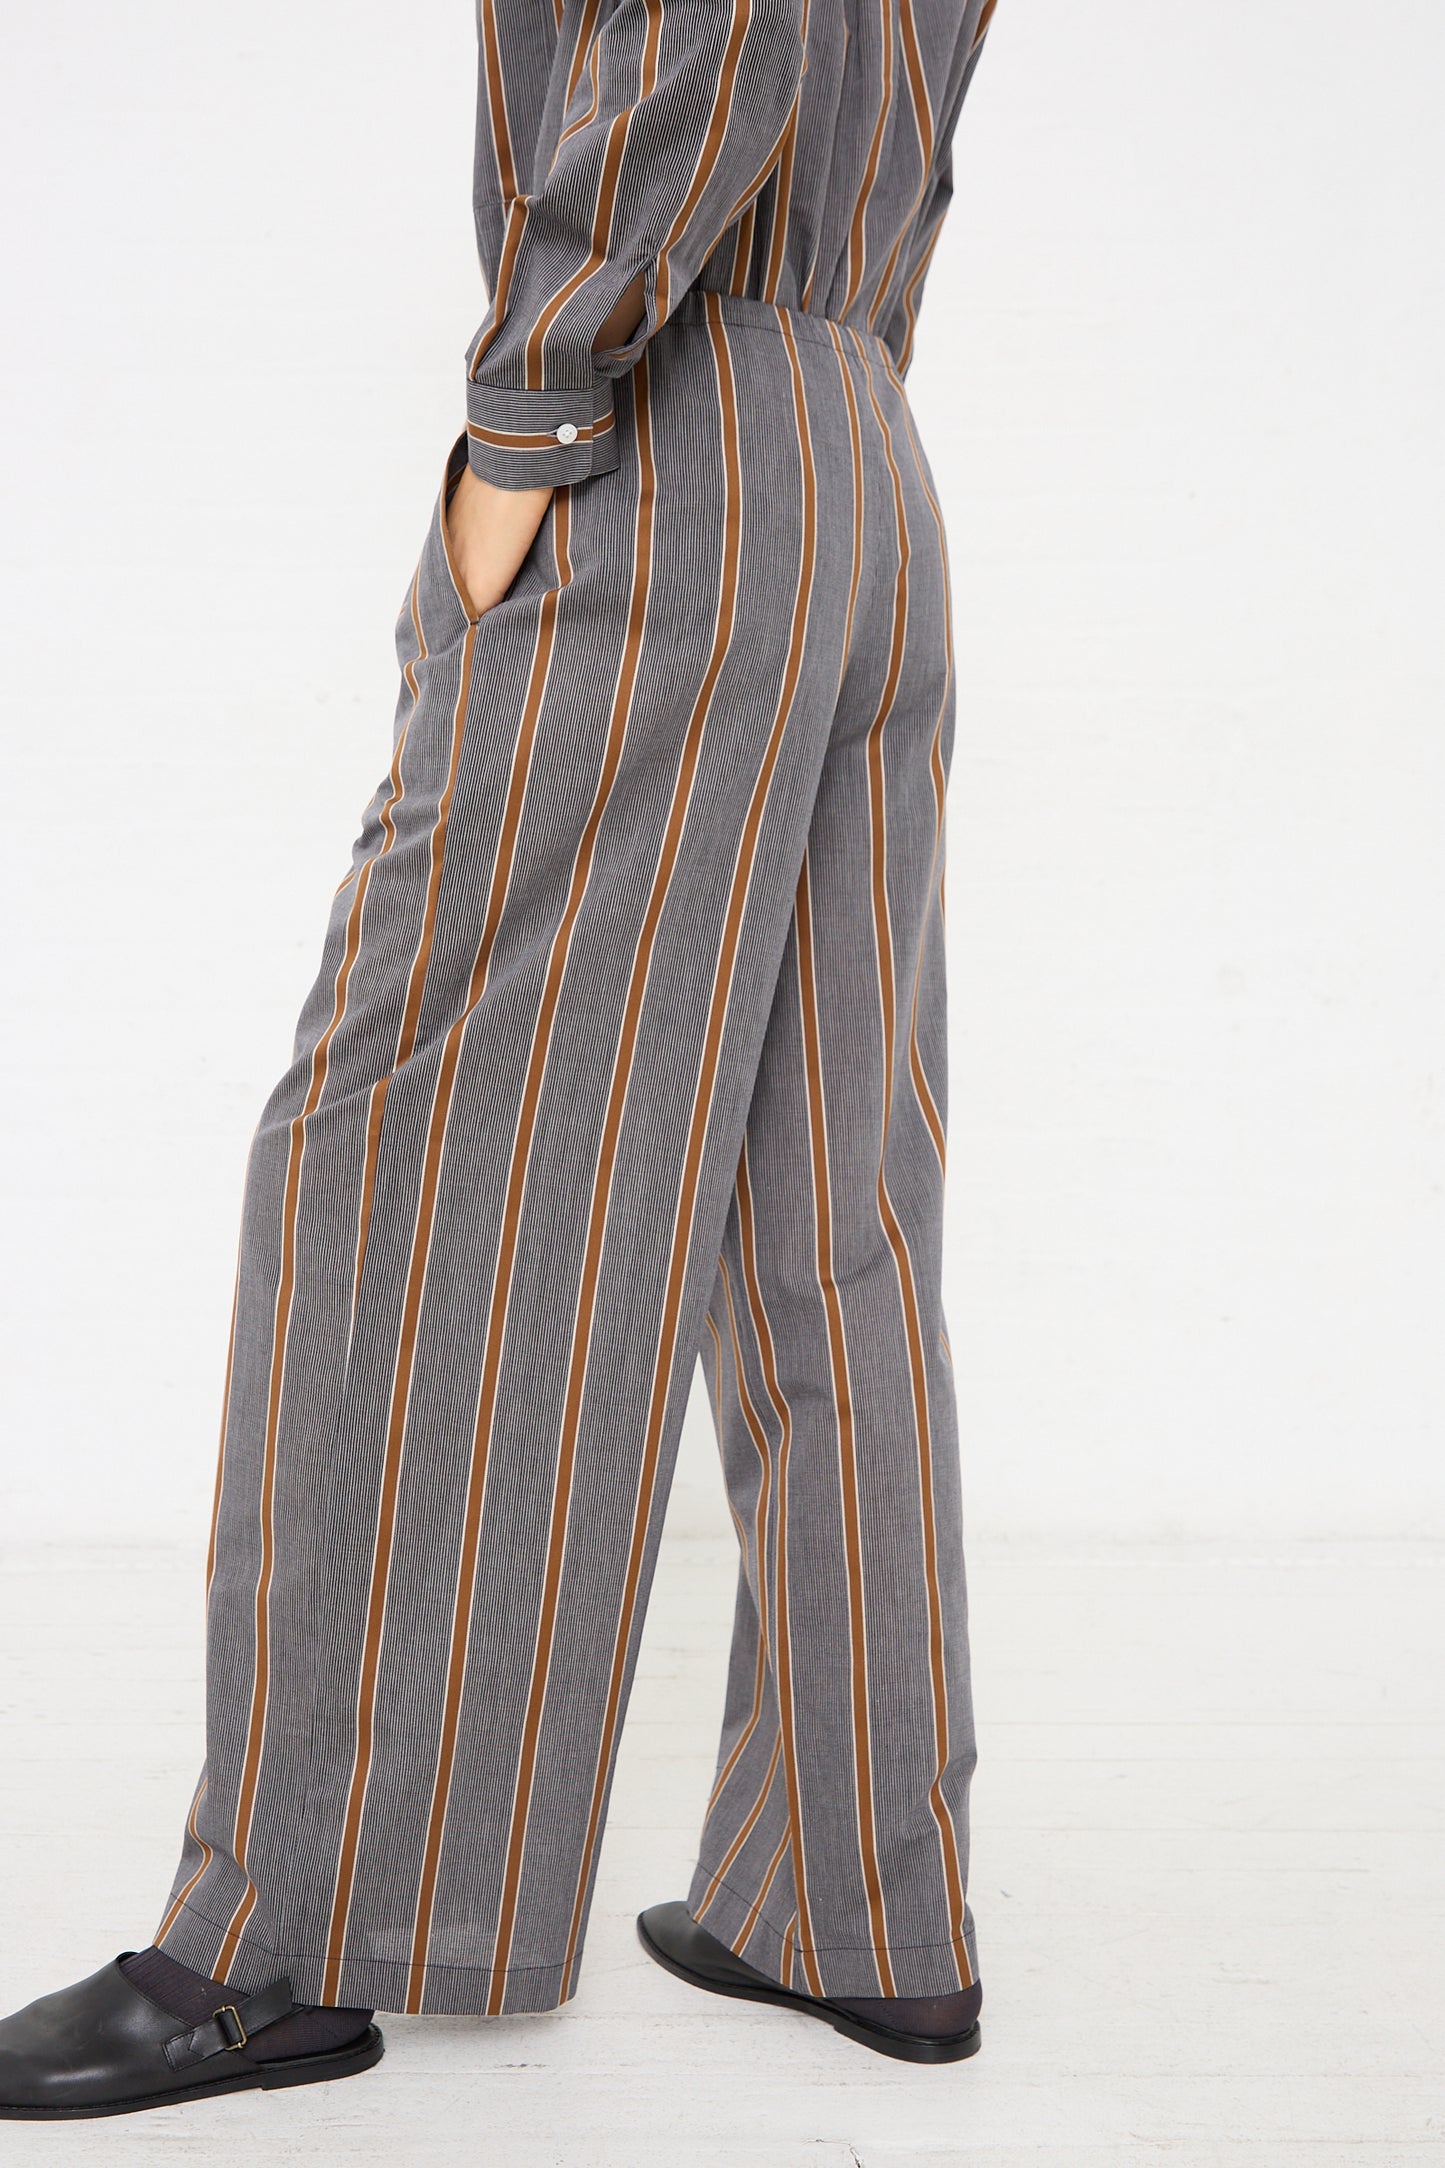 The side of a woman wearing an oversized Maxi Large Pant in Striped Black and Noisette jumpsuit made of lightweight Japanese cotton by Cristaseya.